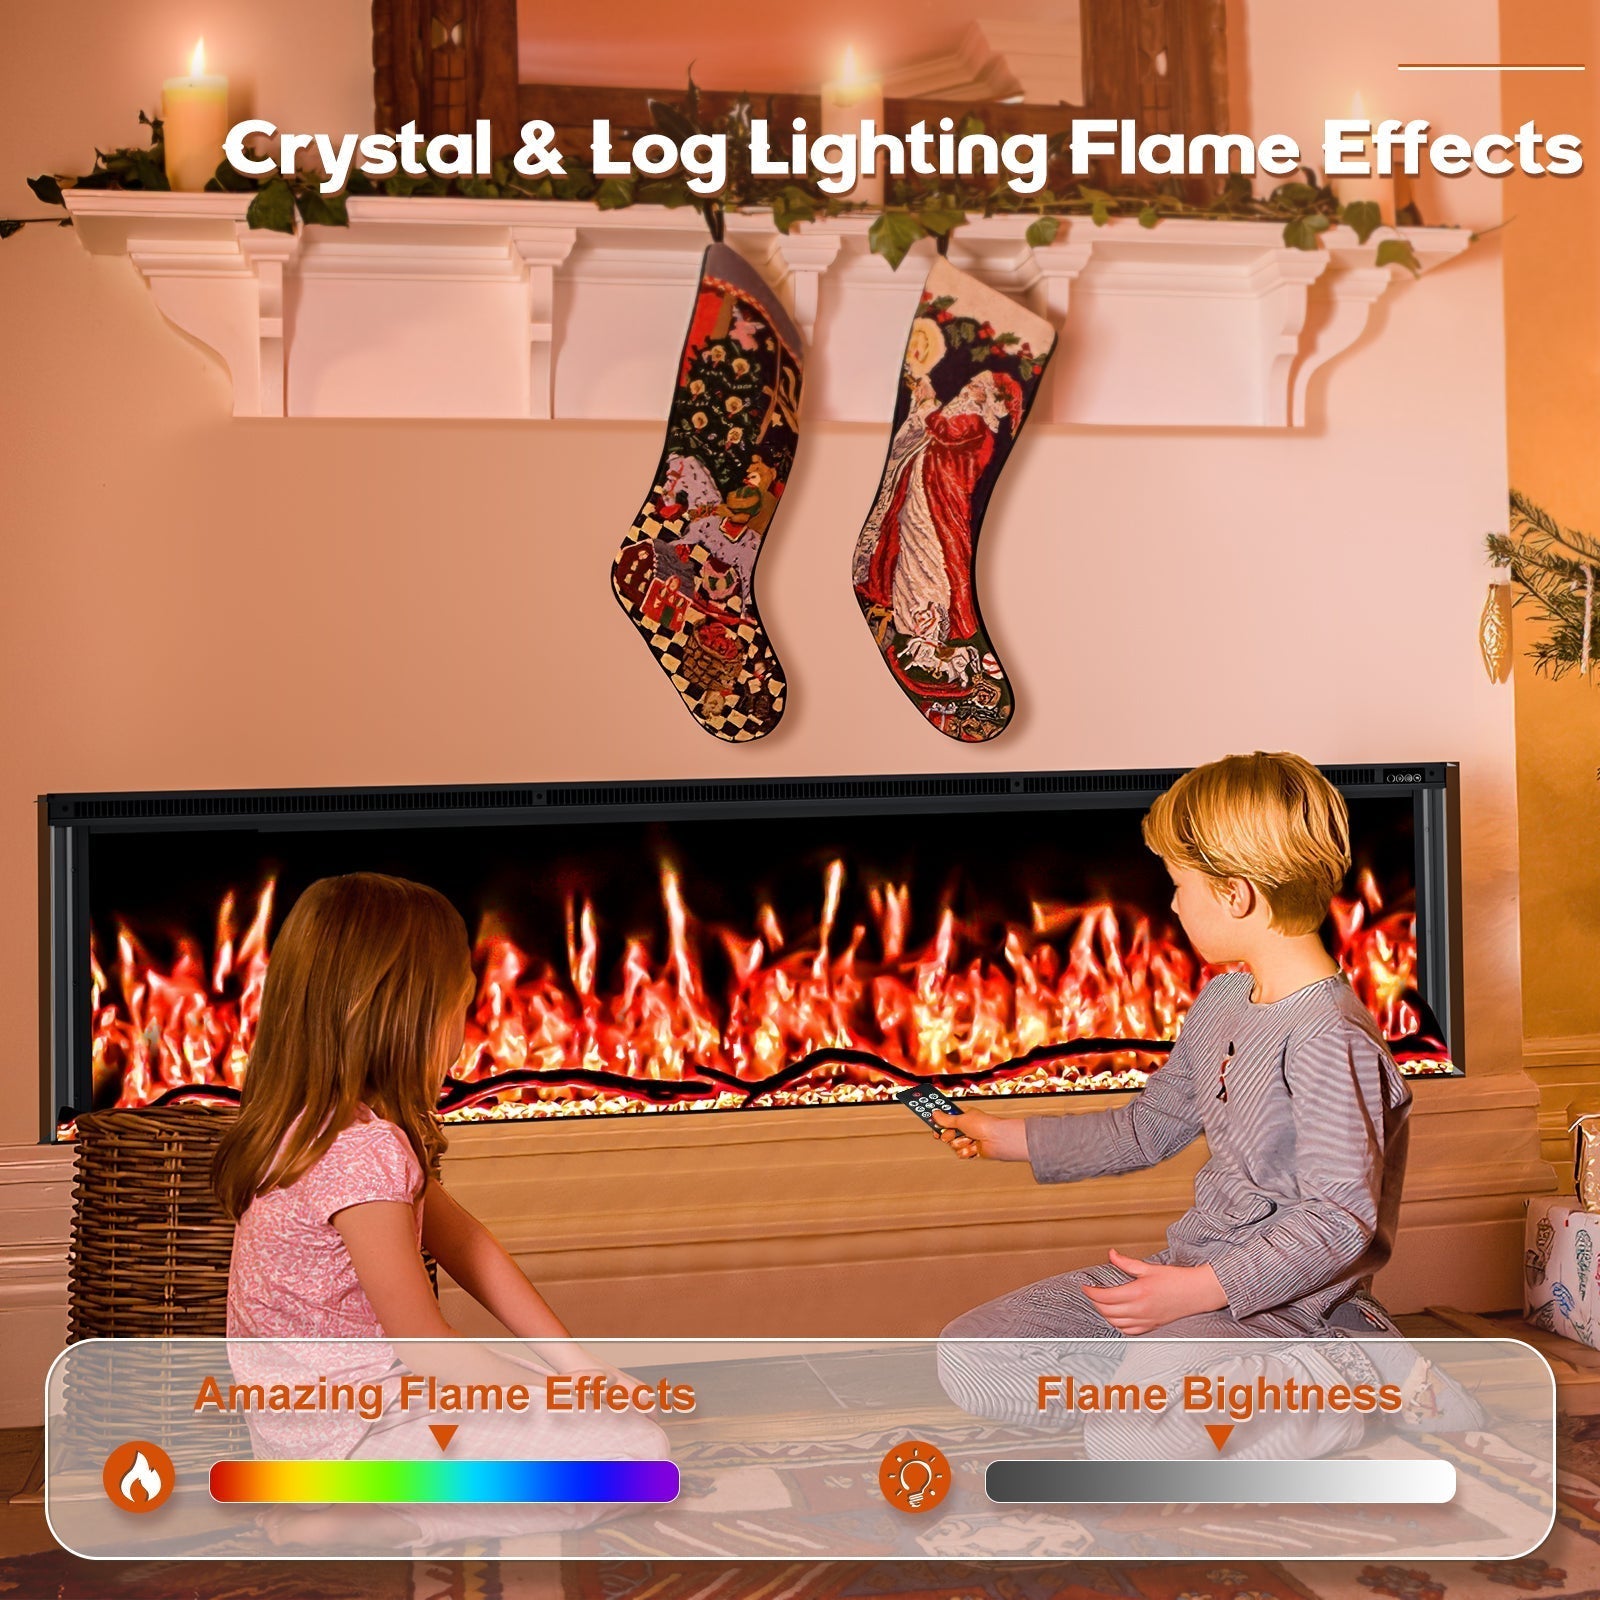 Inserts 3-Sided Electric Fireplace 80-inch Long Modern Eletric Fire Place Space Heater for Indoor Living Room Bedroom Use, Realistic Led Flame Color with Remote Control, Log & Crystals, Black